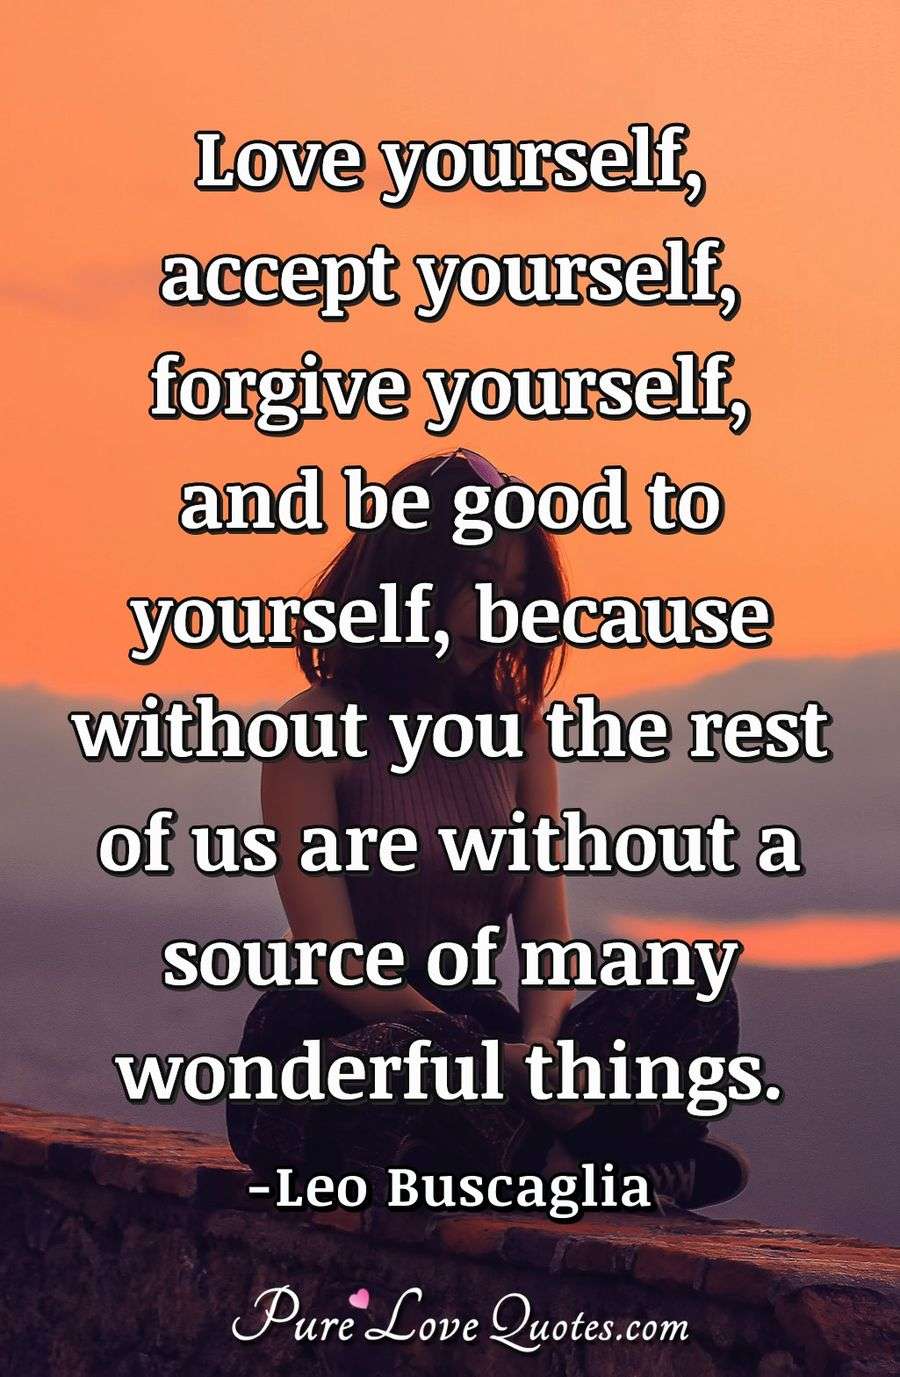 Love yourself, accept yourself, forgive yourself, and be good to yourself, because without you the rest of us are without a source of many wonderful things. - Leo Buscaglia